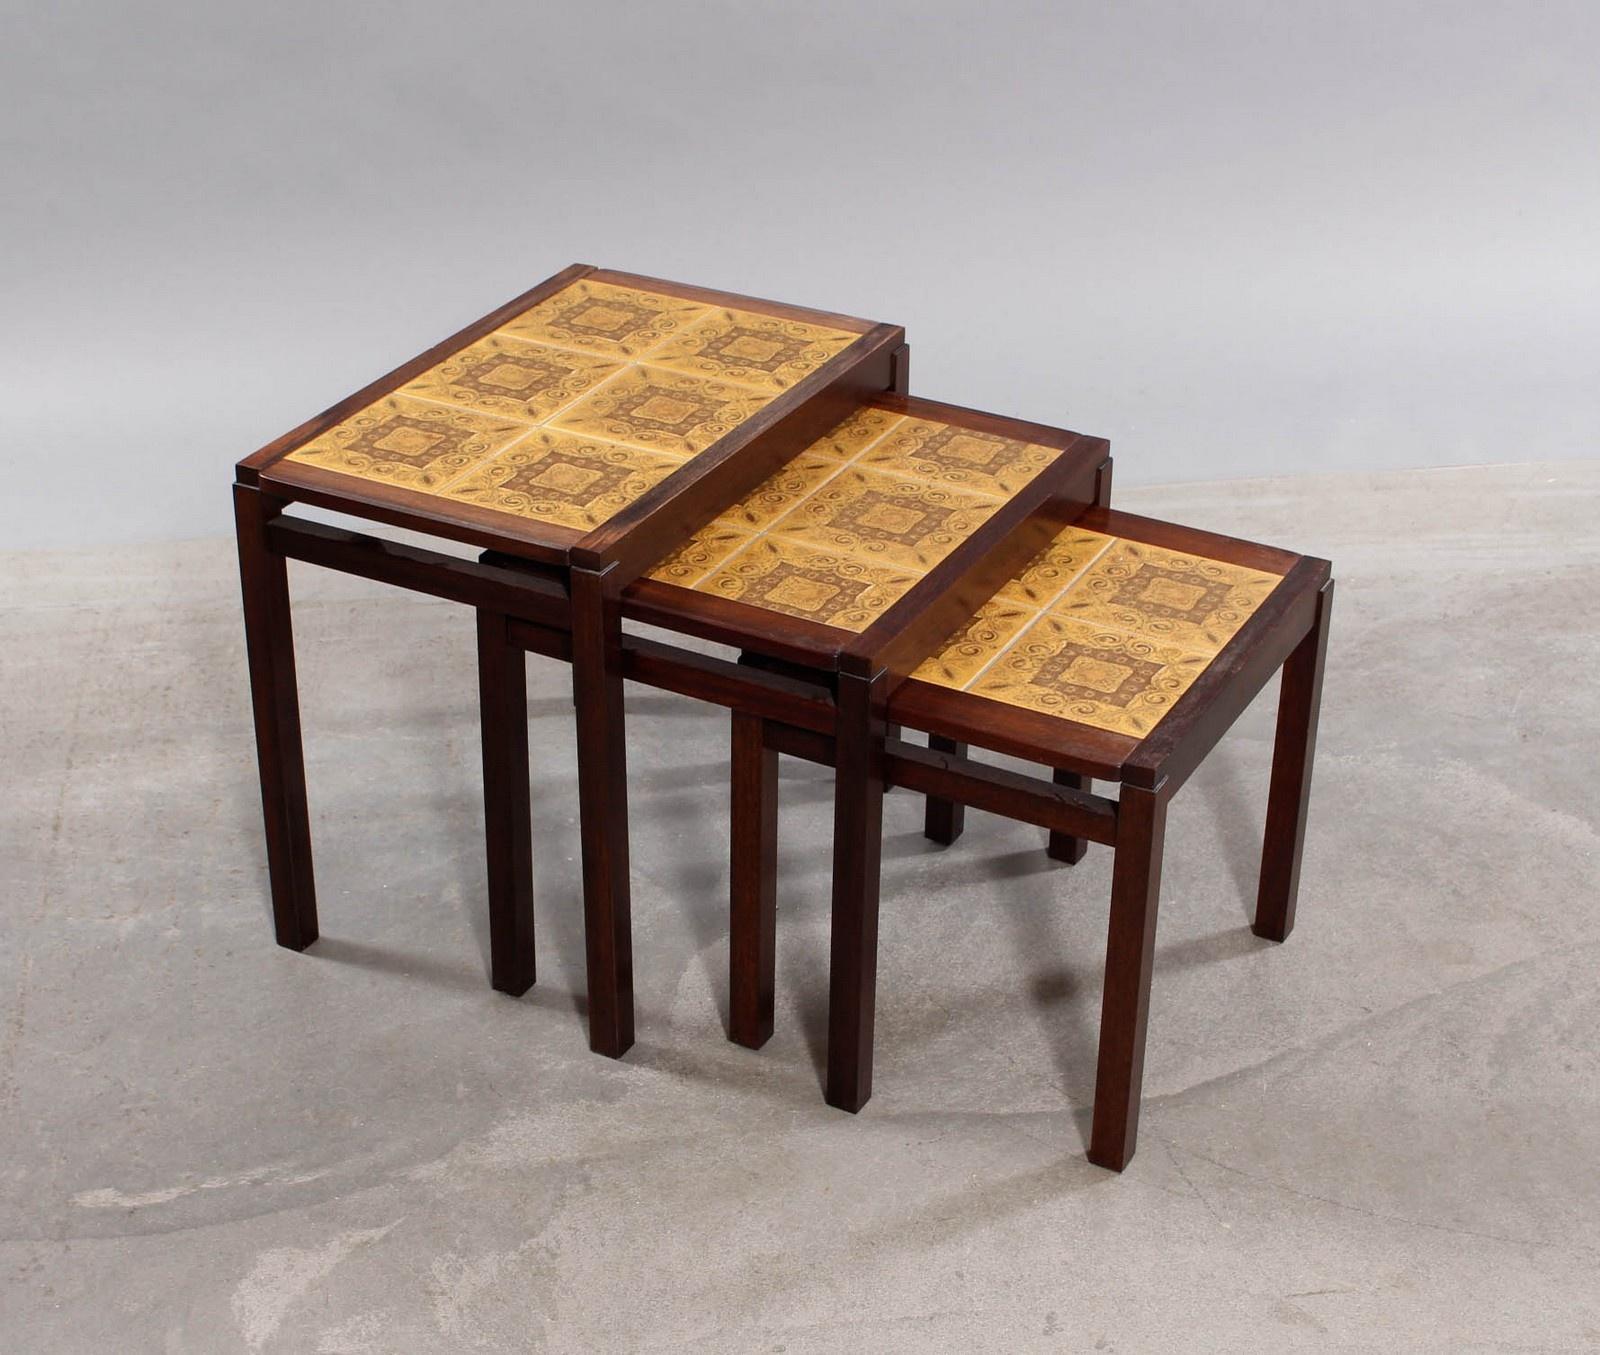 Danish furniture manufacturer. Nesting tables crafted in rosewood and decorative tiles. 